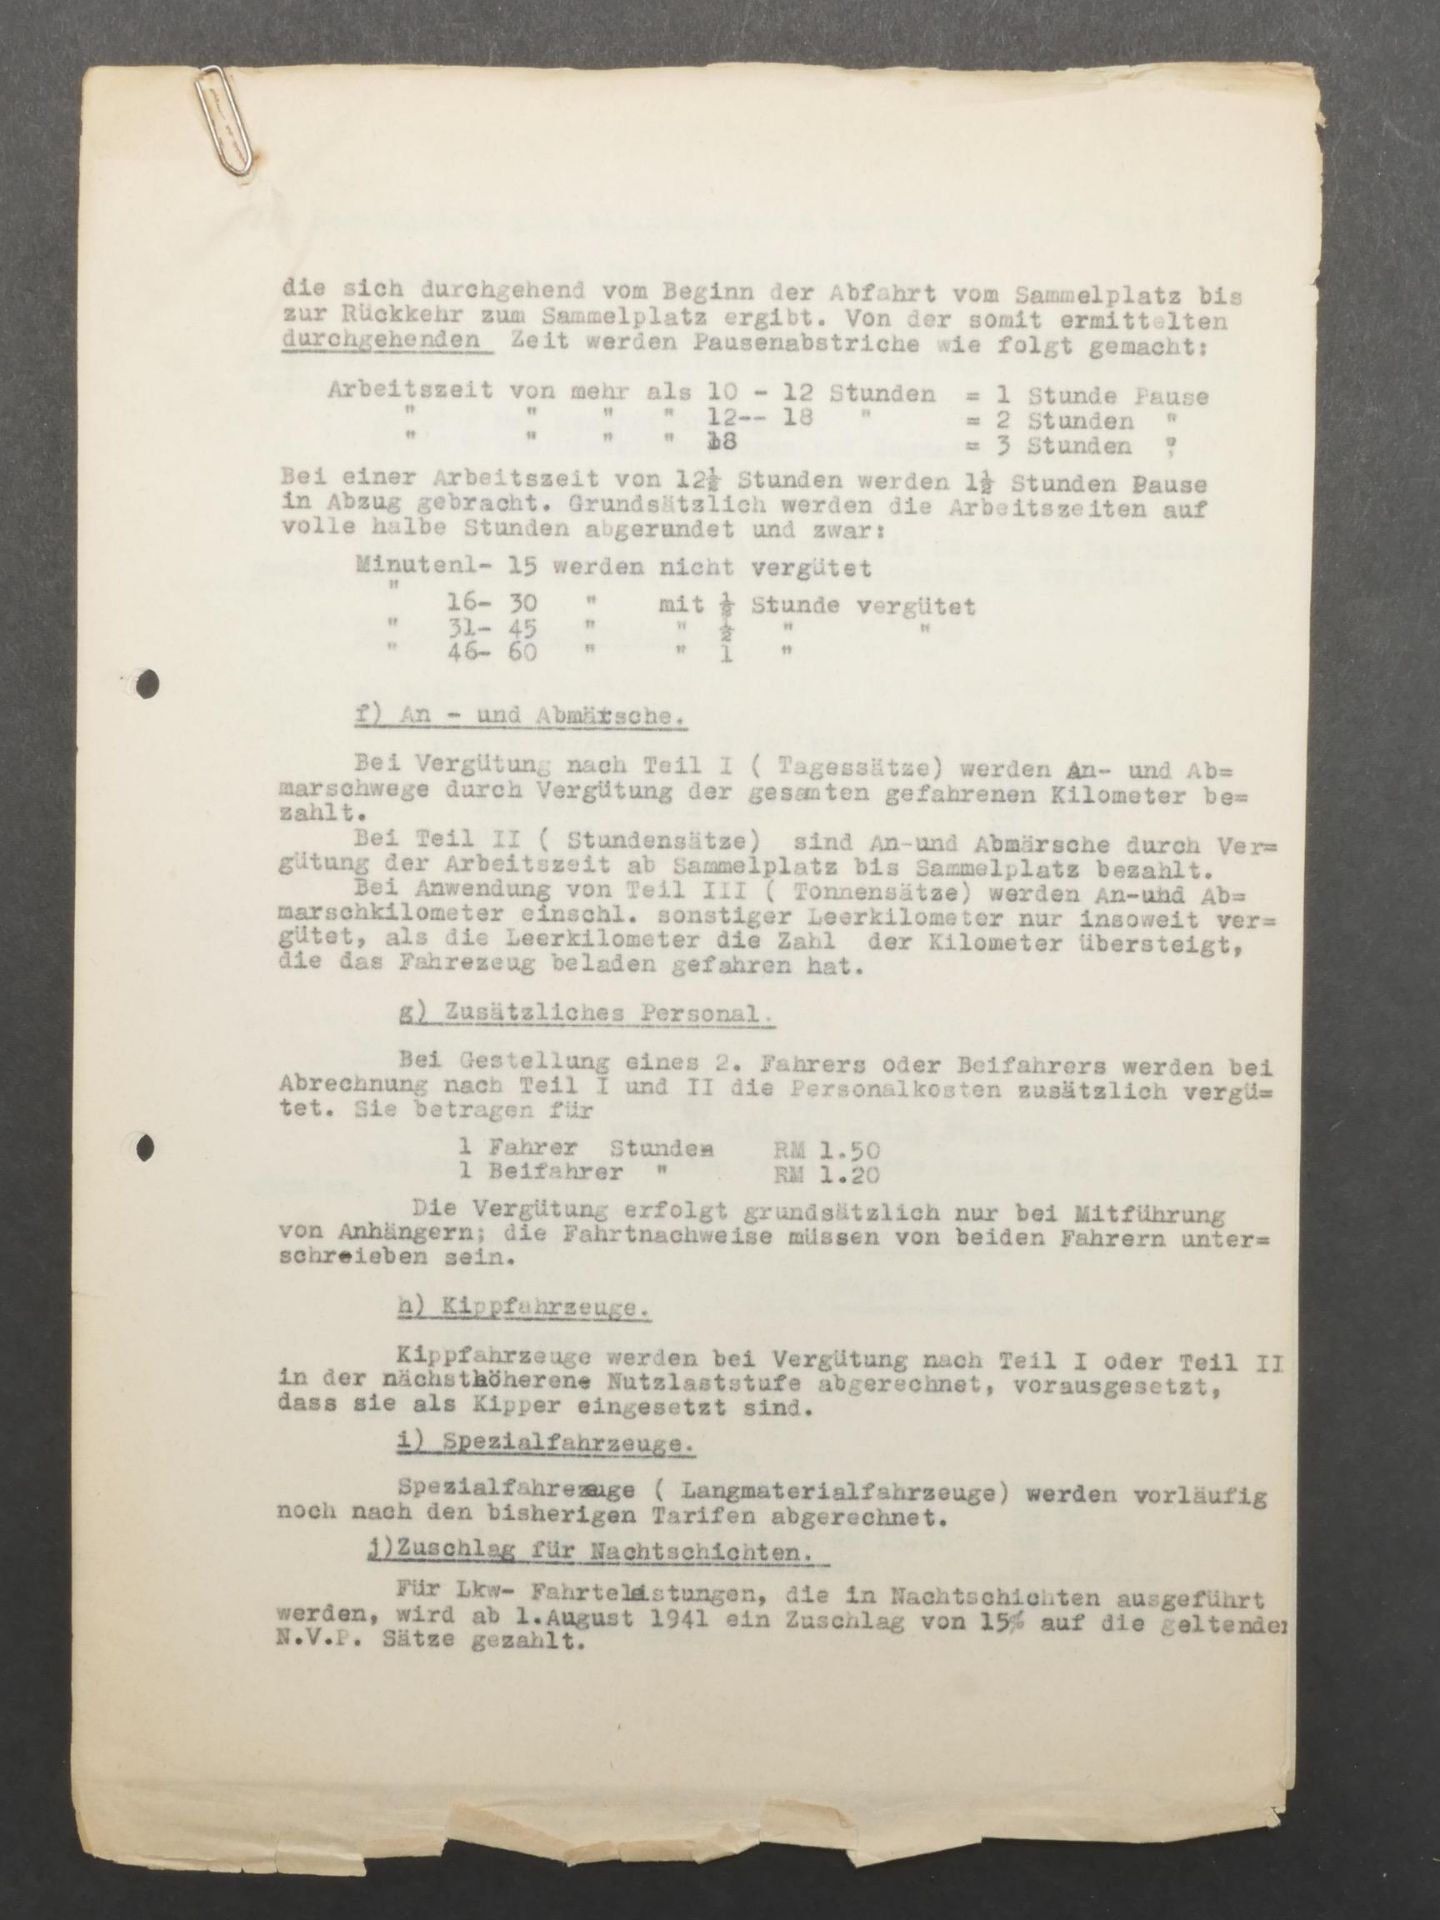 Documents de l Organisation Todt. Documents from the Todt Organization. - Image 2 of 5